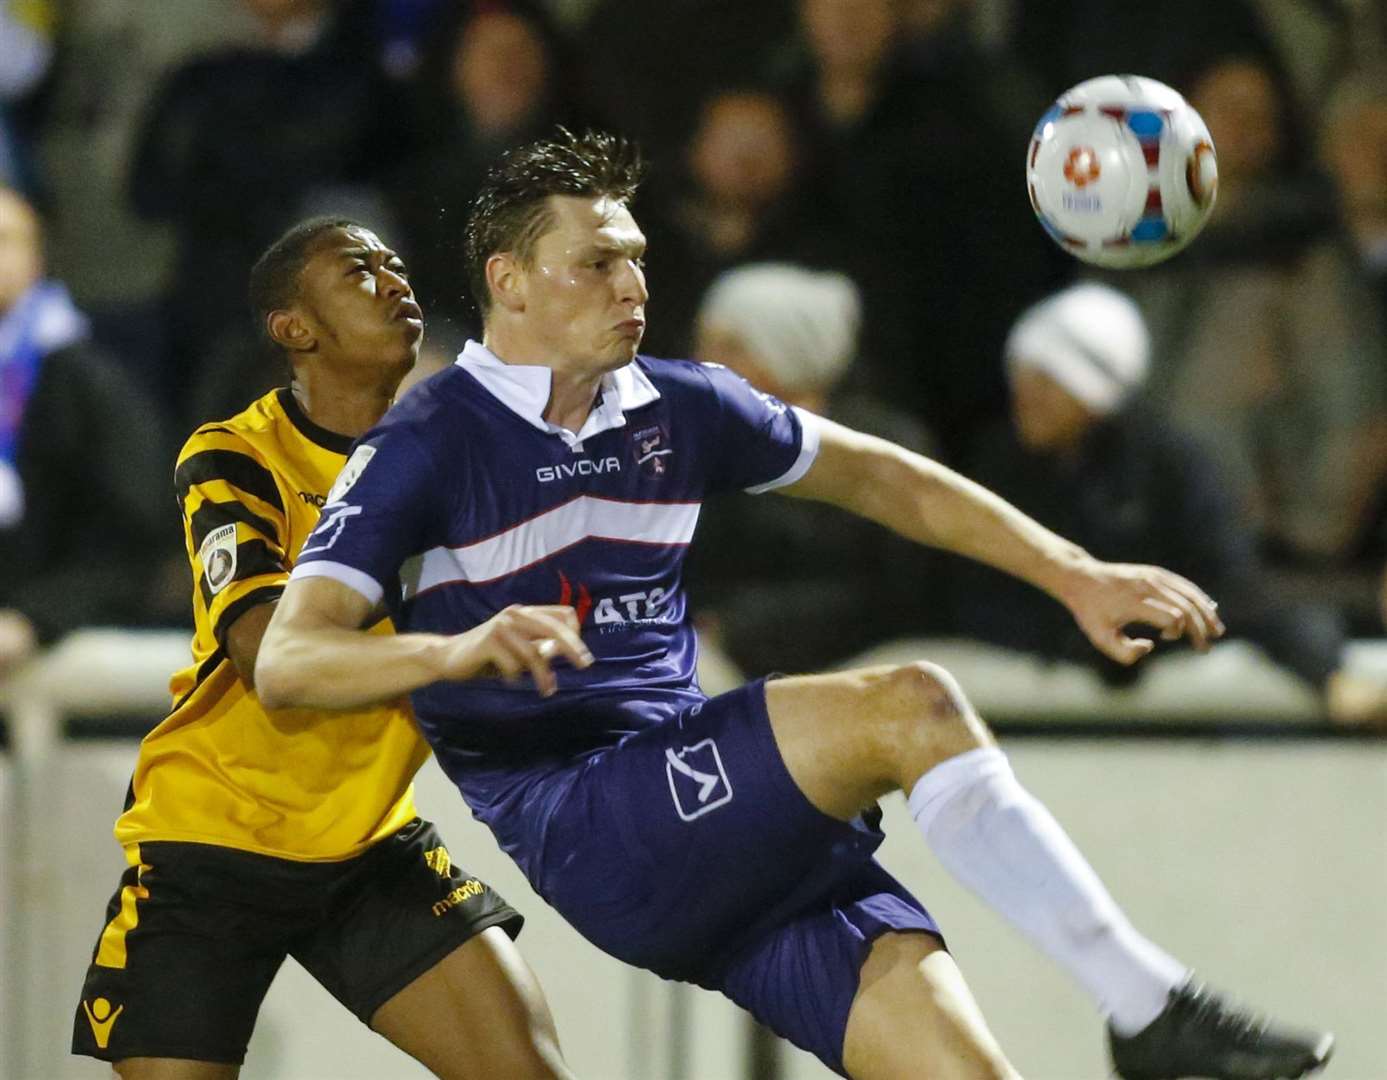 New Ebbsfleet United defender Jake Goodman in action for Margate during the 2015/16 season. Picture: Martin Apps